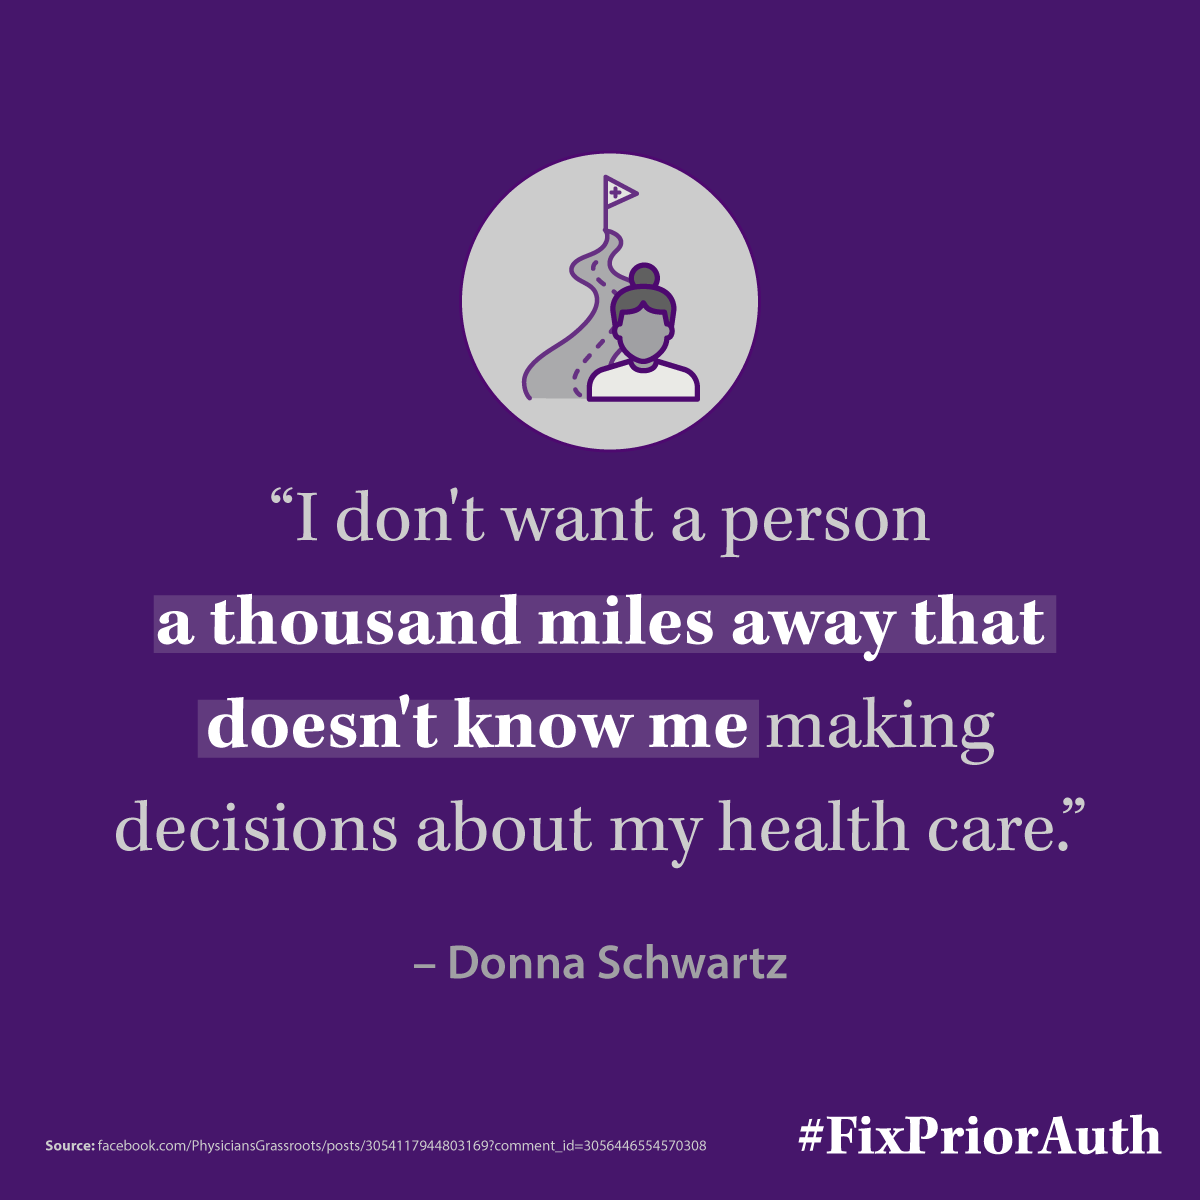 AMA_PA_Social_PAN_Quote-DonnaSchwartz_1-1.png